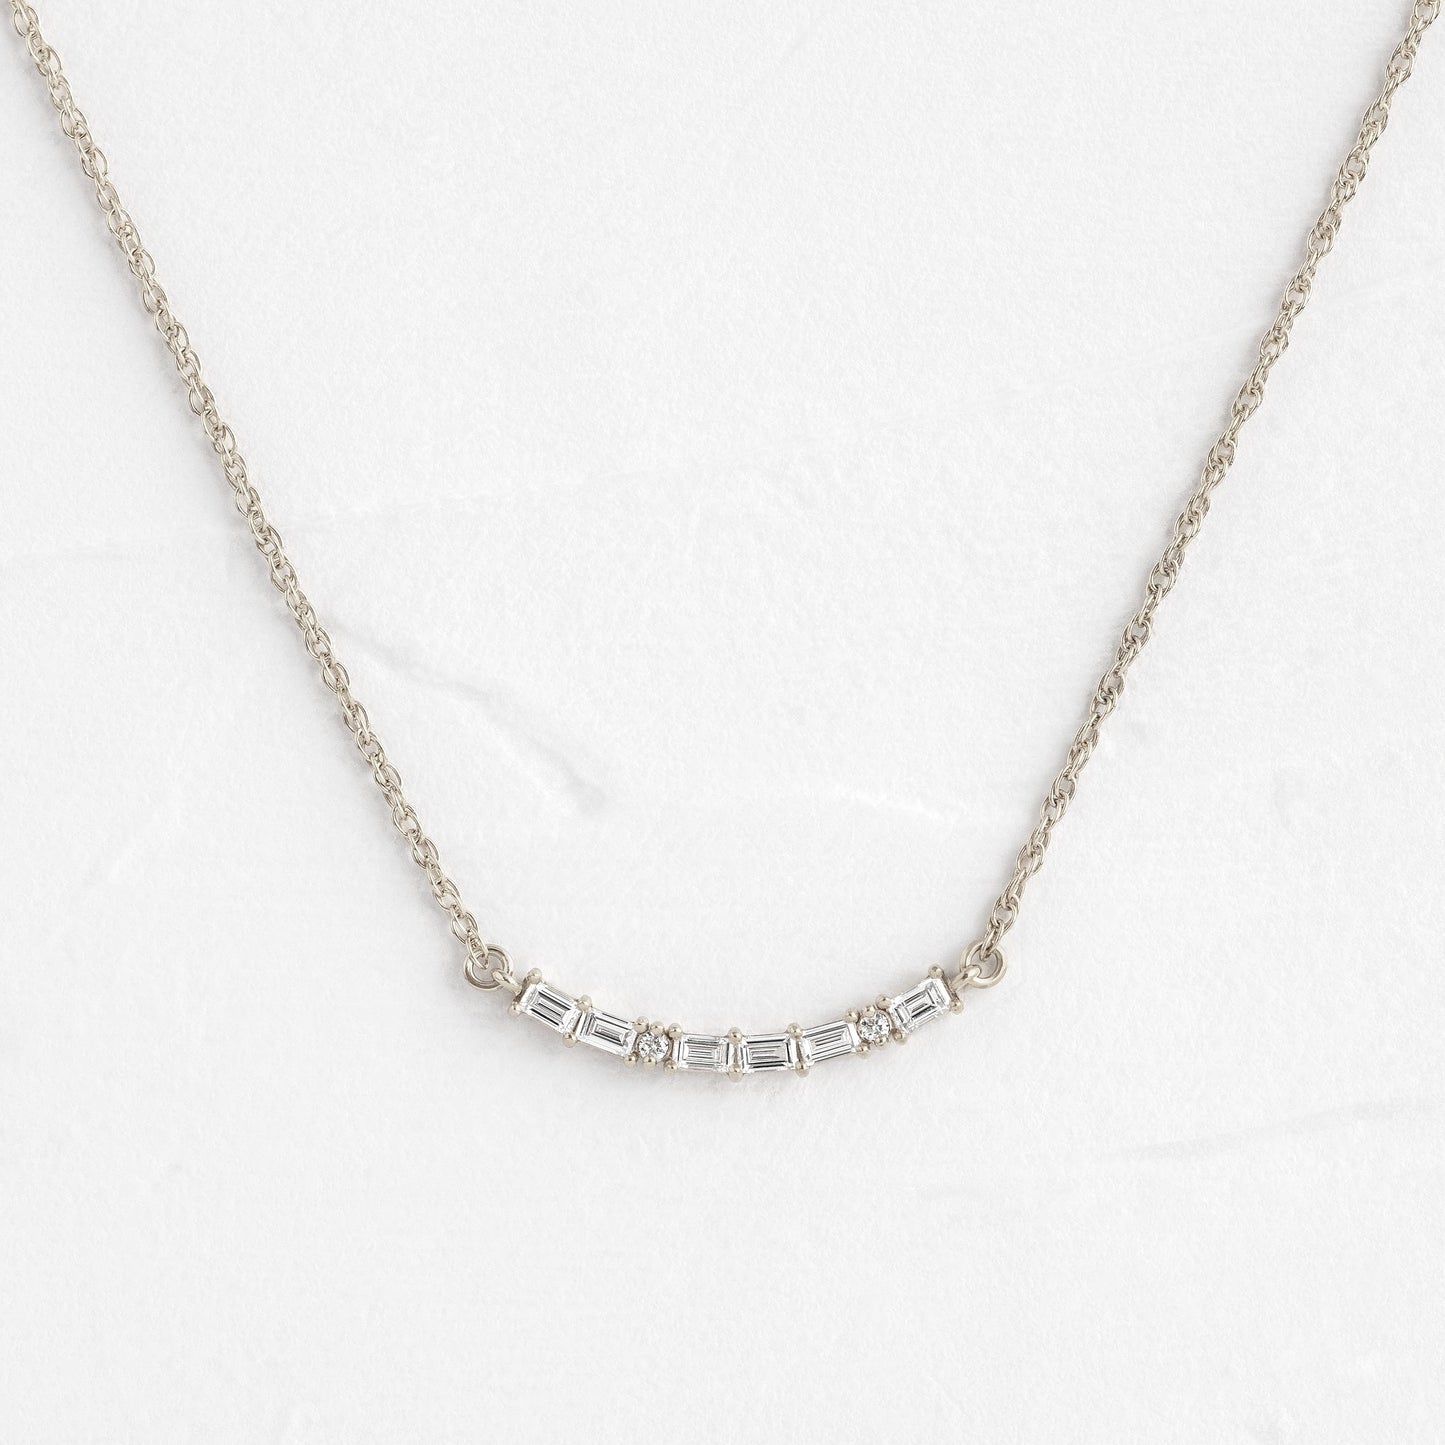 Morse Code Necklace - In Stock